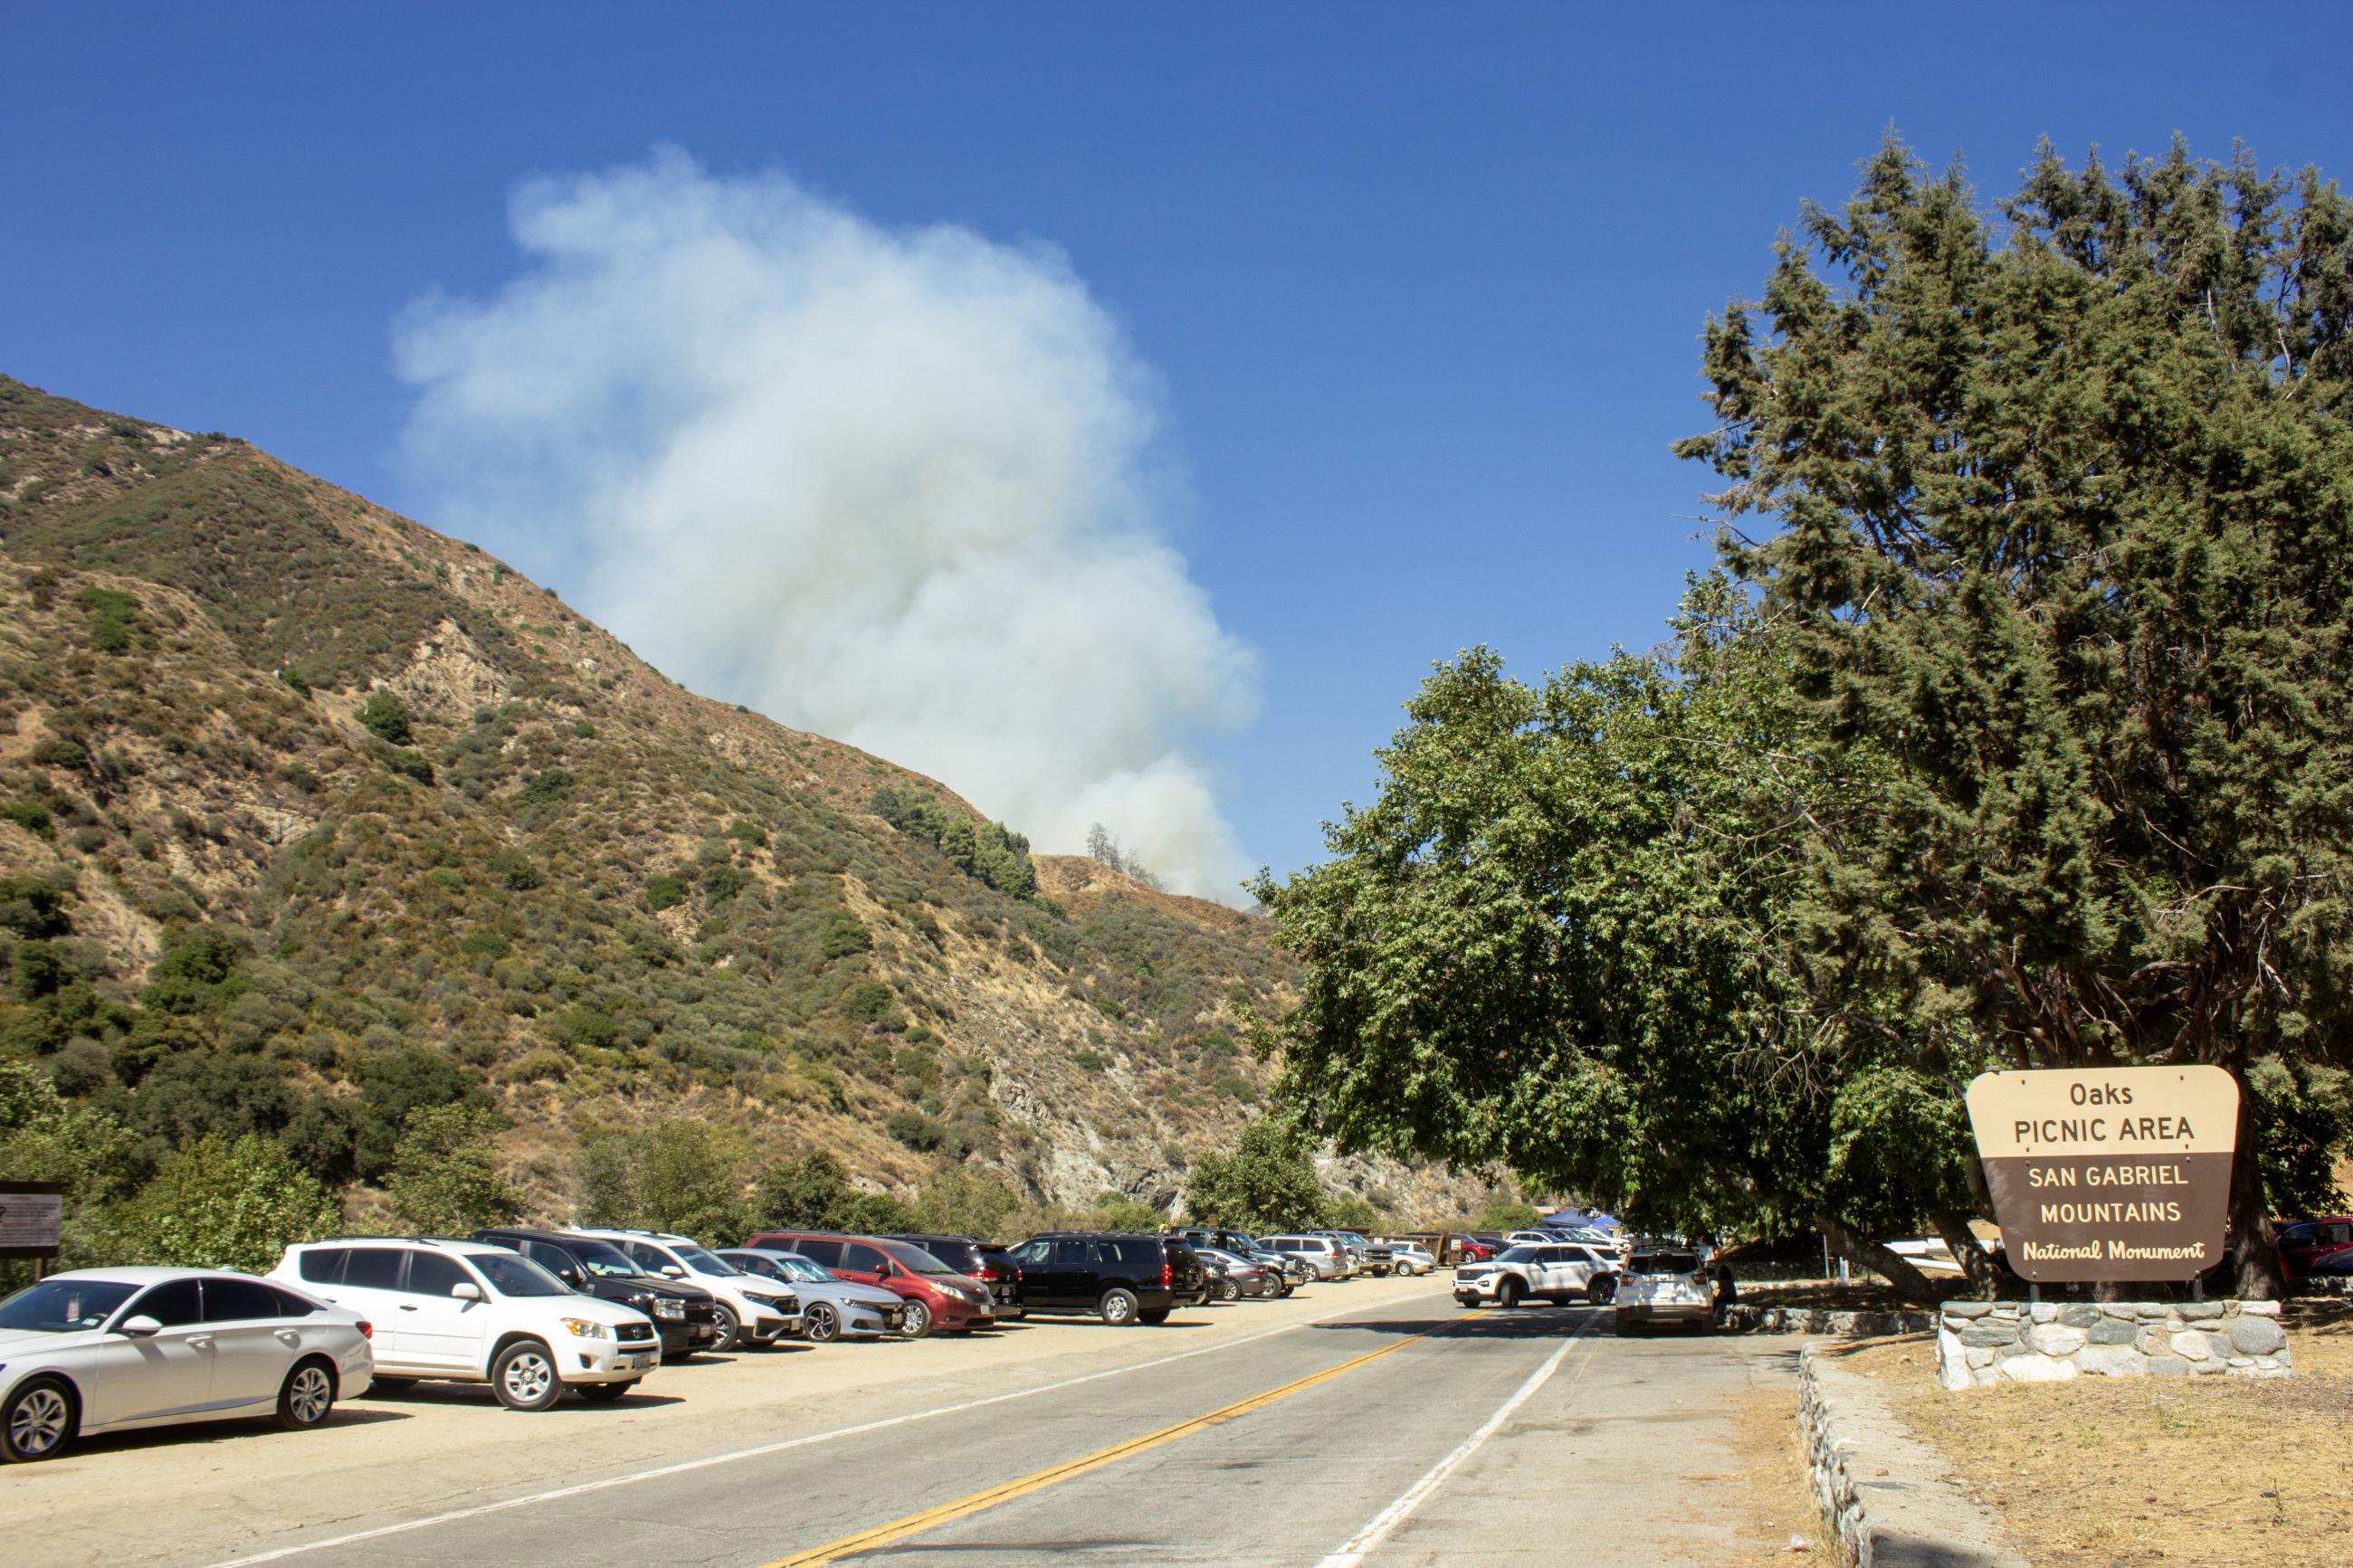 A roadway with a row of parked cars on the left and a Forest Service sign on the right. In a distance a plume of smoke from a wildfire can be seen,